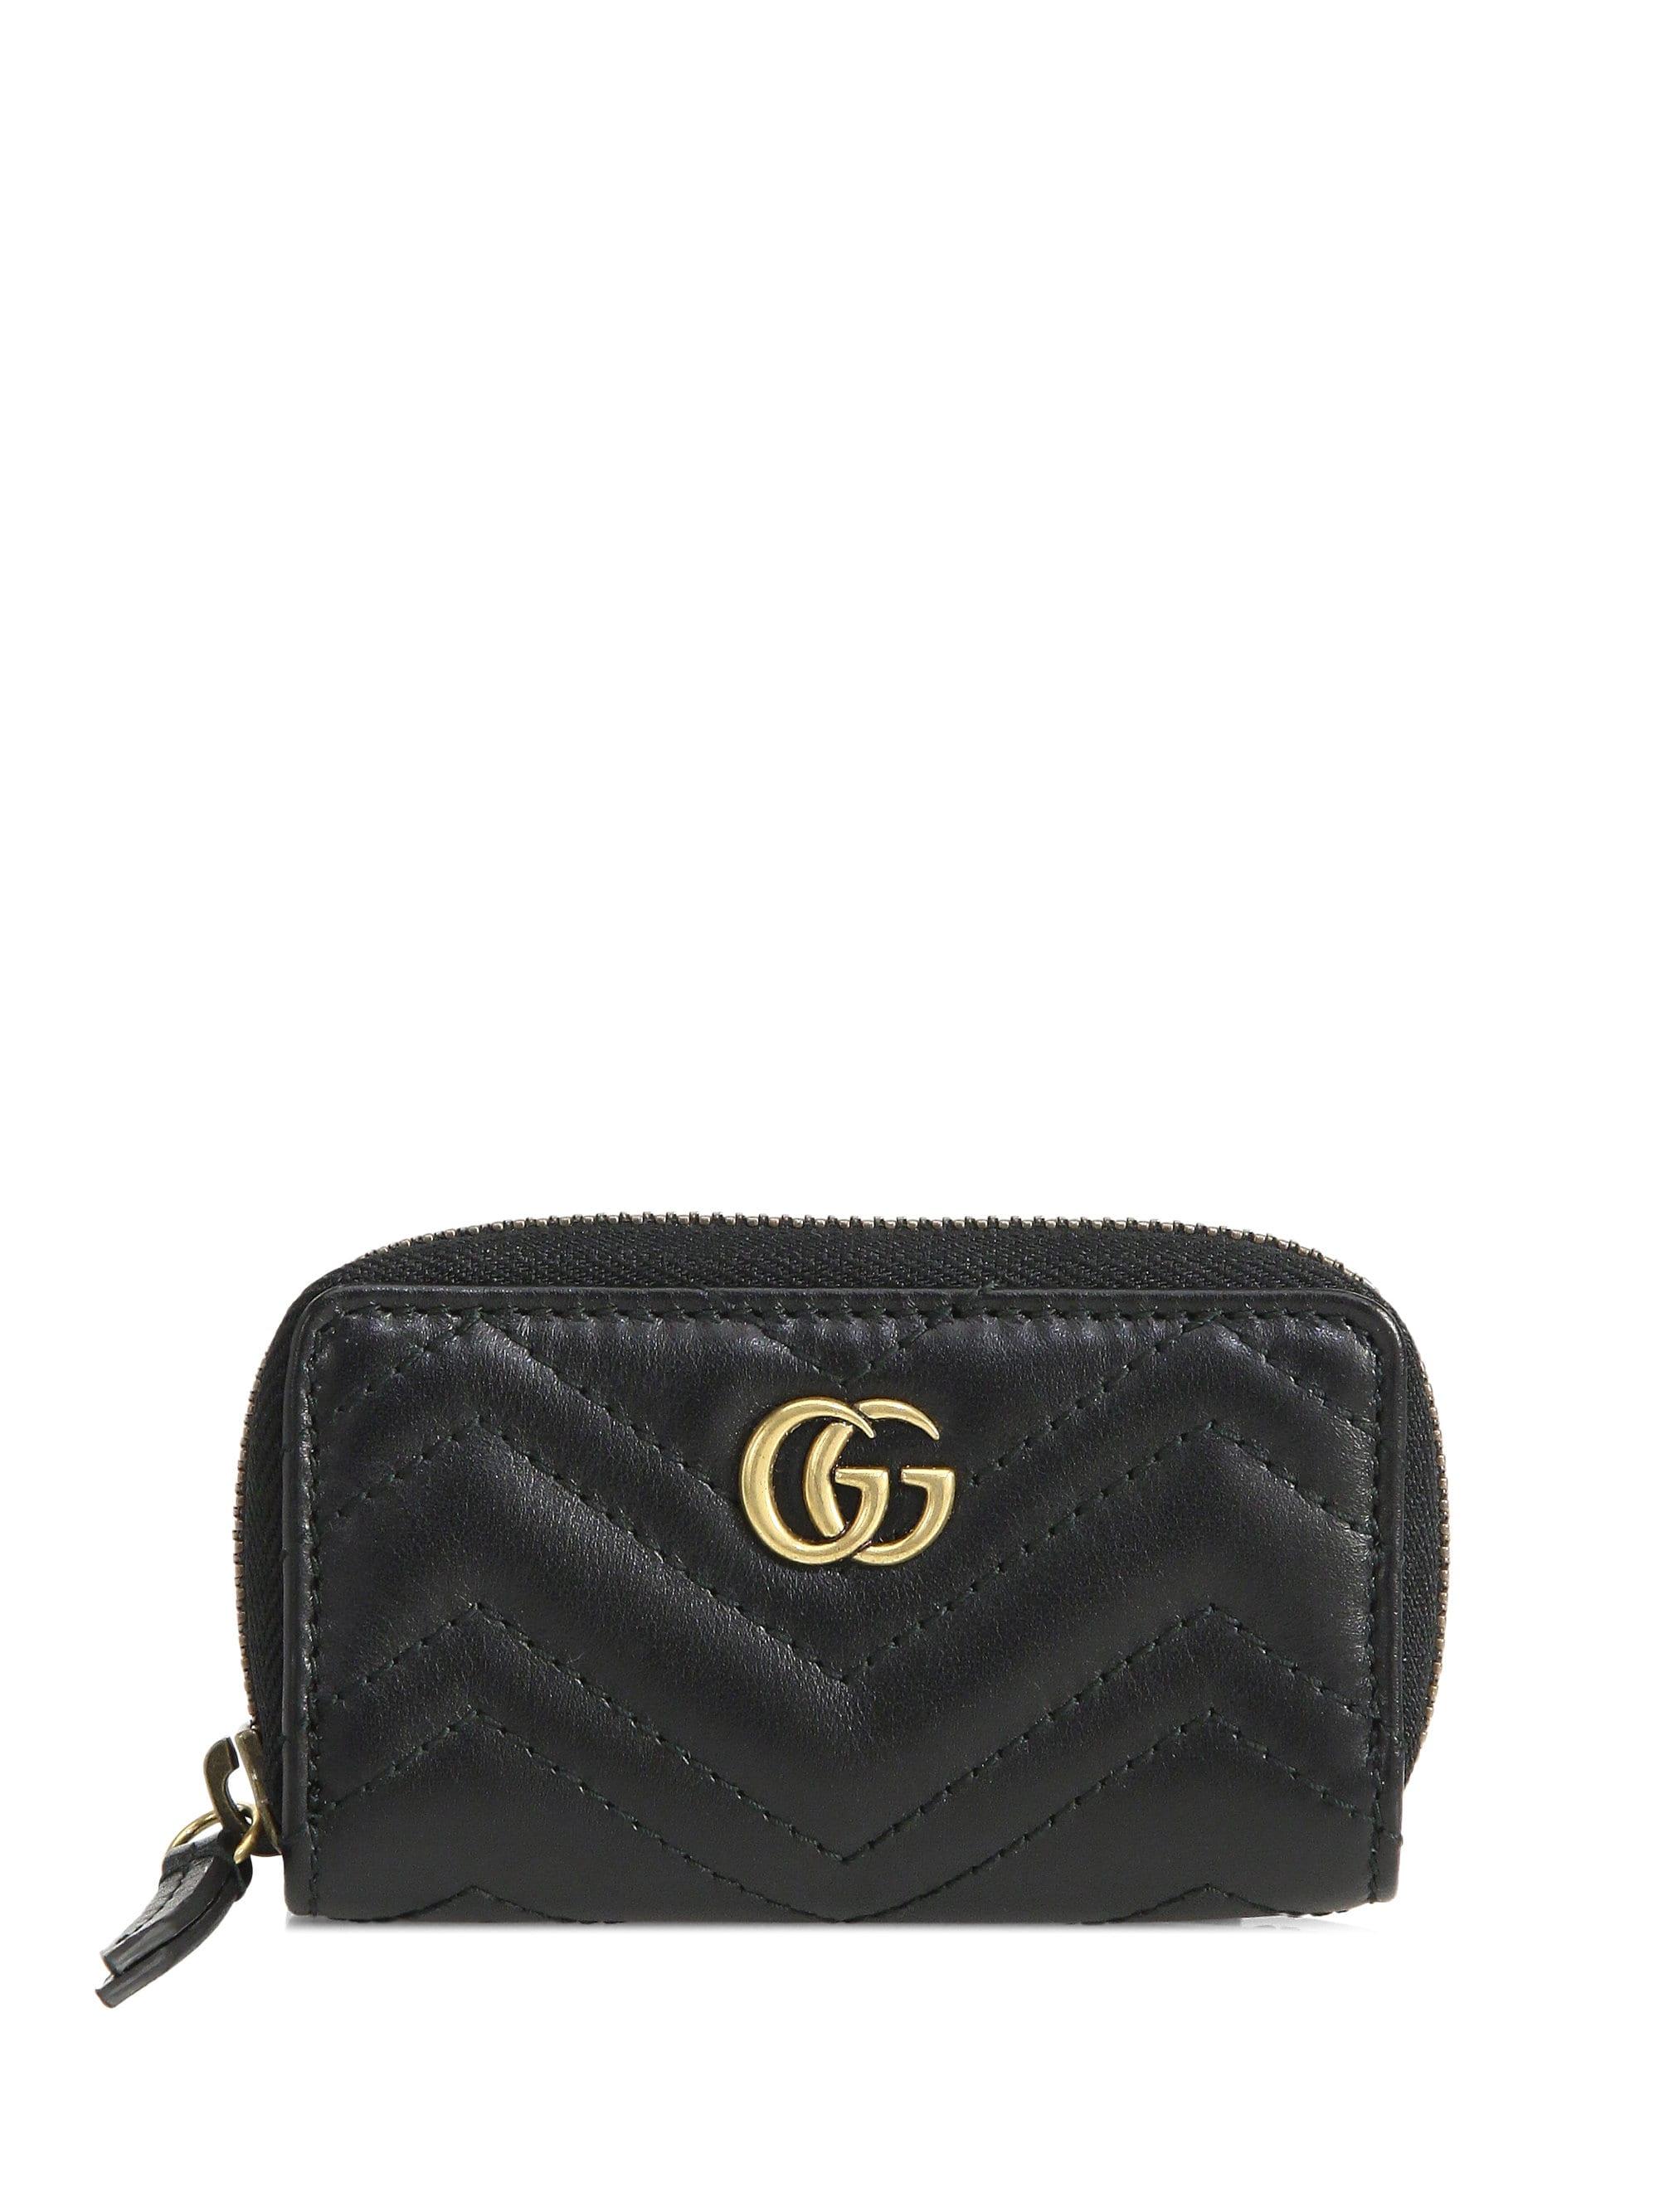 Buy [Gucci] Key Case Women's GG Marmont Black 456118 17WAG 1283 [Parallel  Import] from Japan - Buy authentic Plus exclusive items from Japan